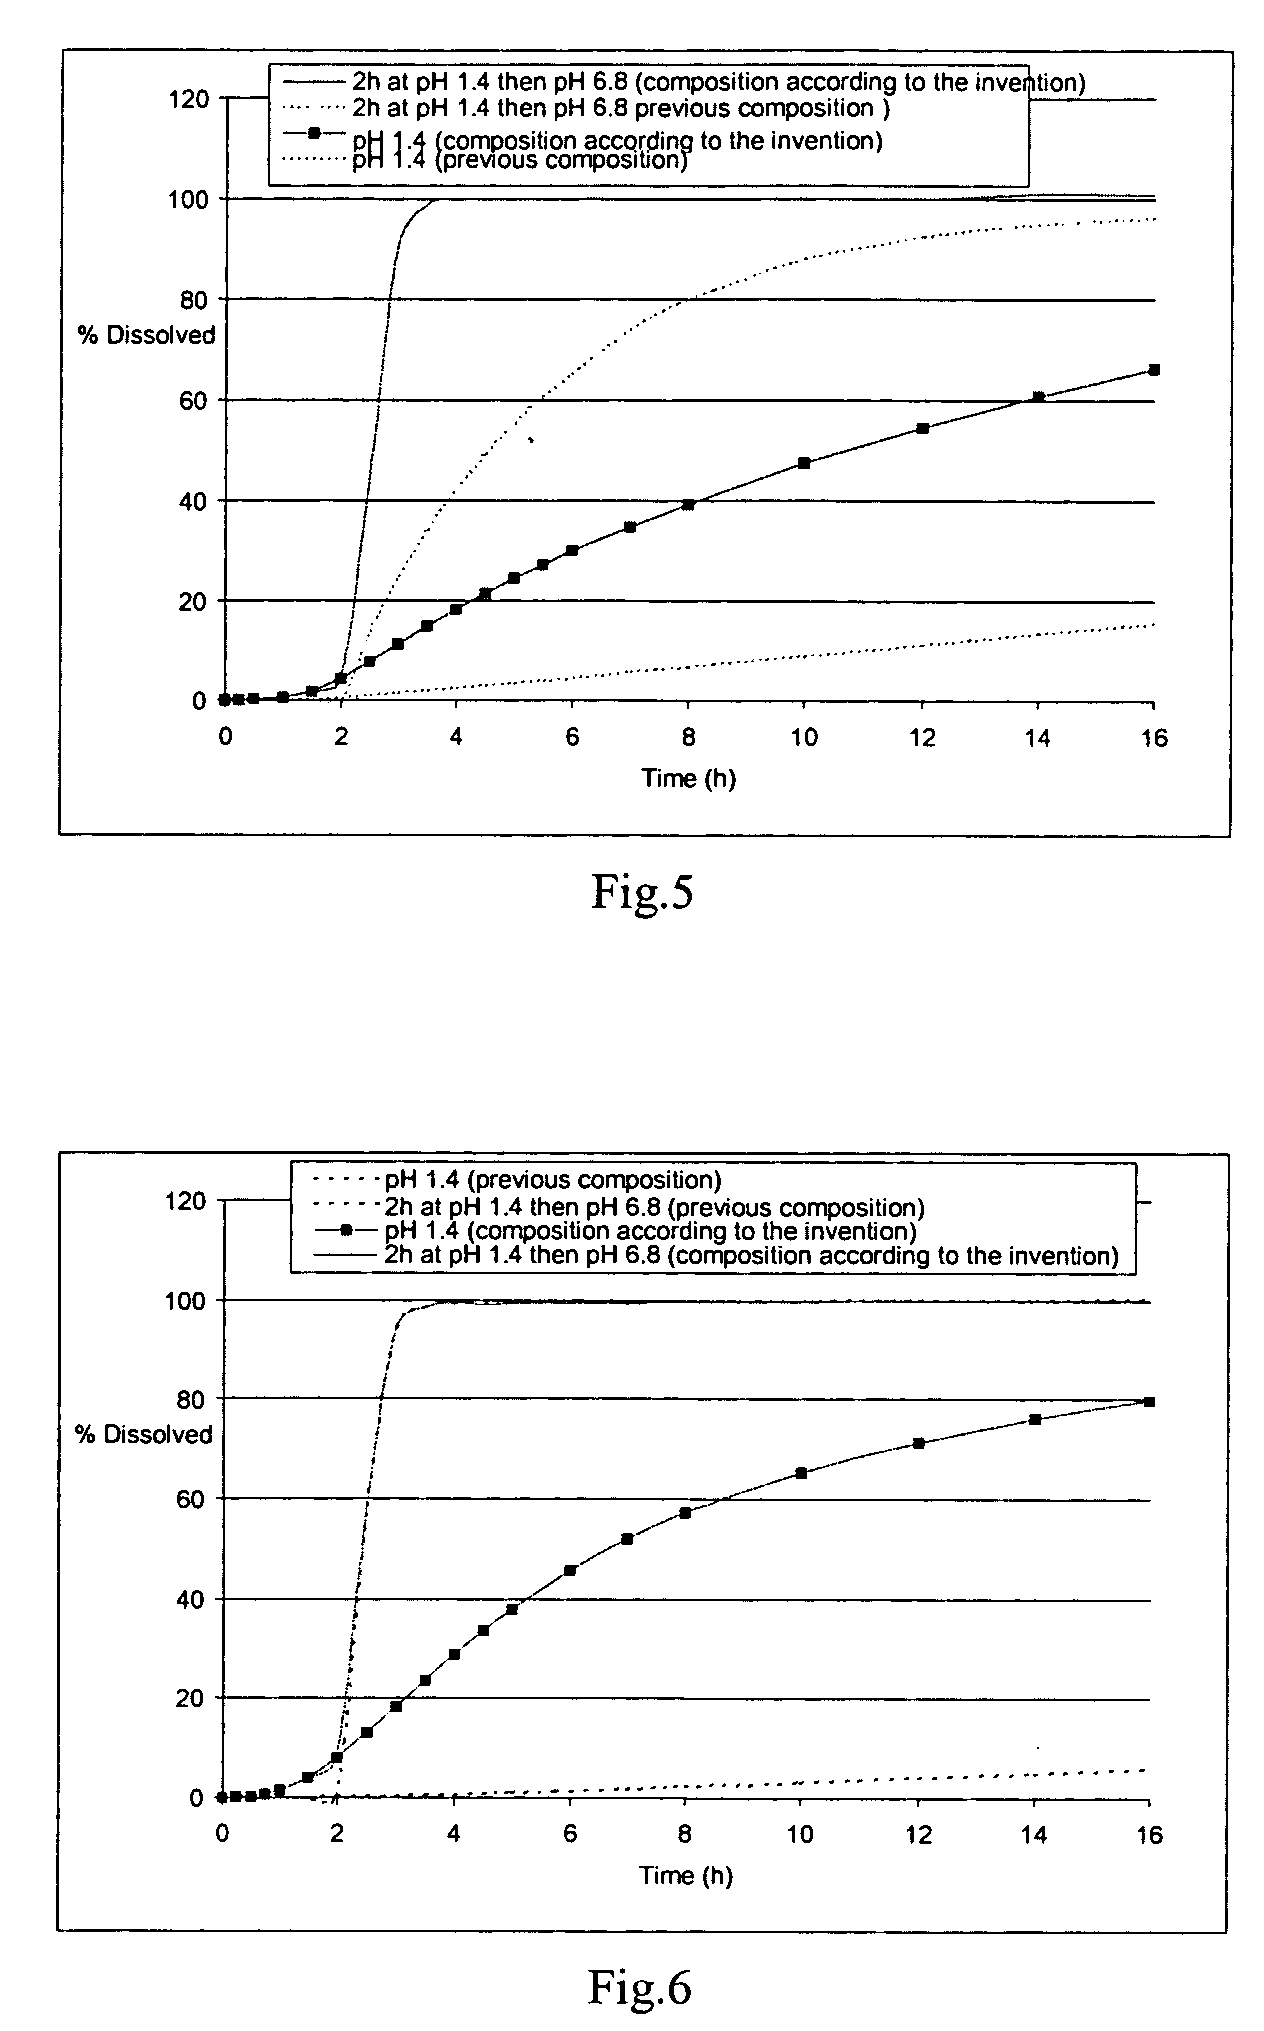 Carvedilol salts, anhydrates and/or solvate thereof, corresponding pharmaceutical compositions, controlled release formulations, and treatment or delivery methods